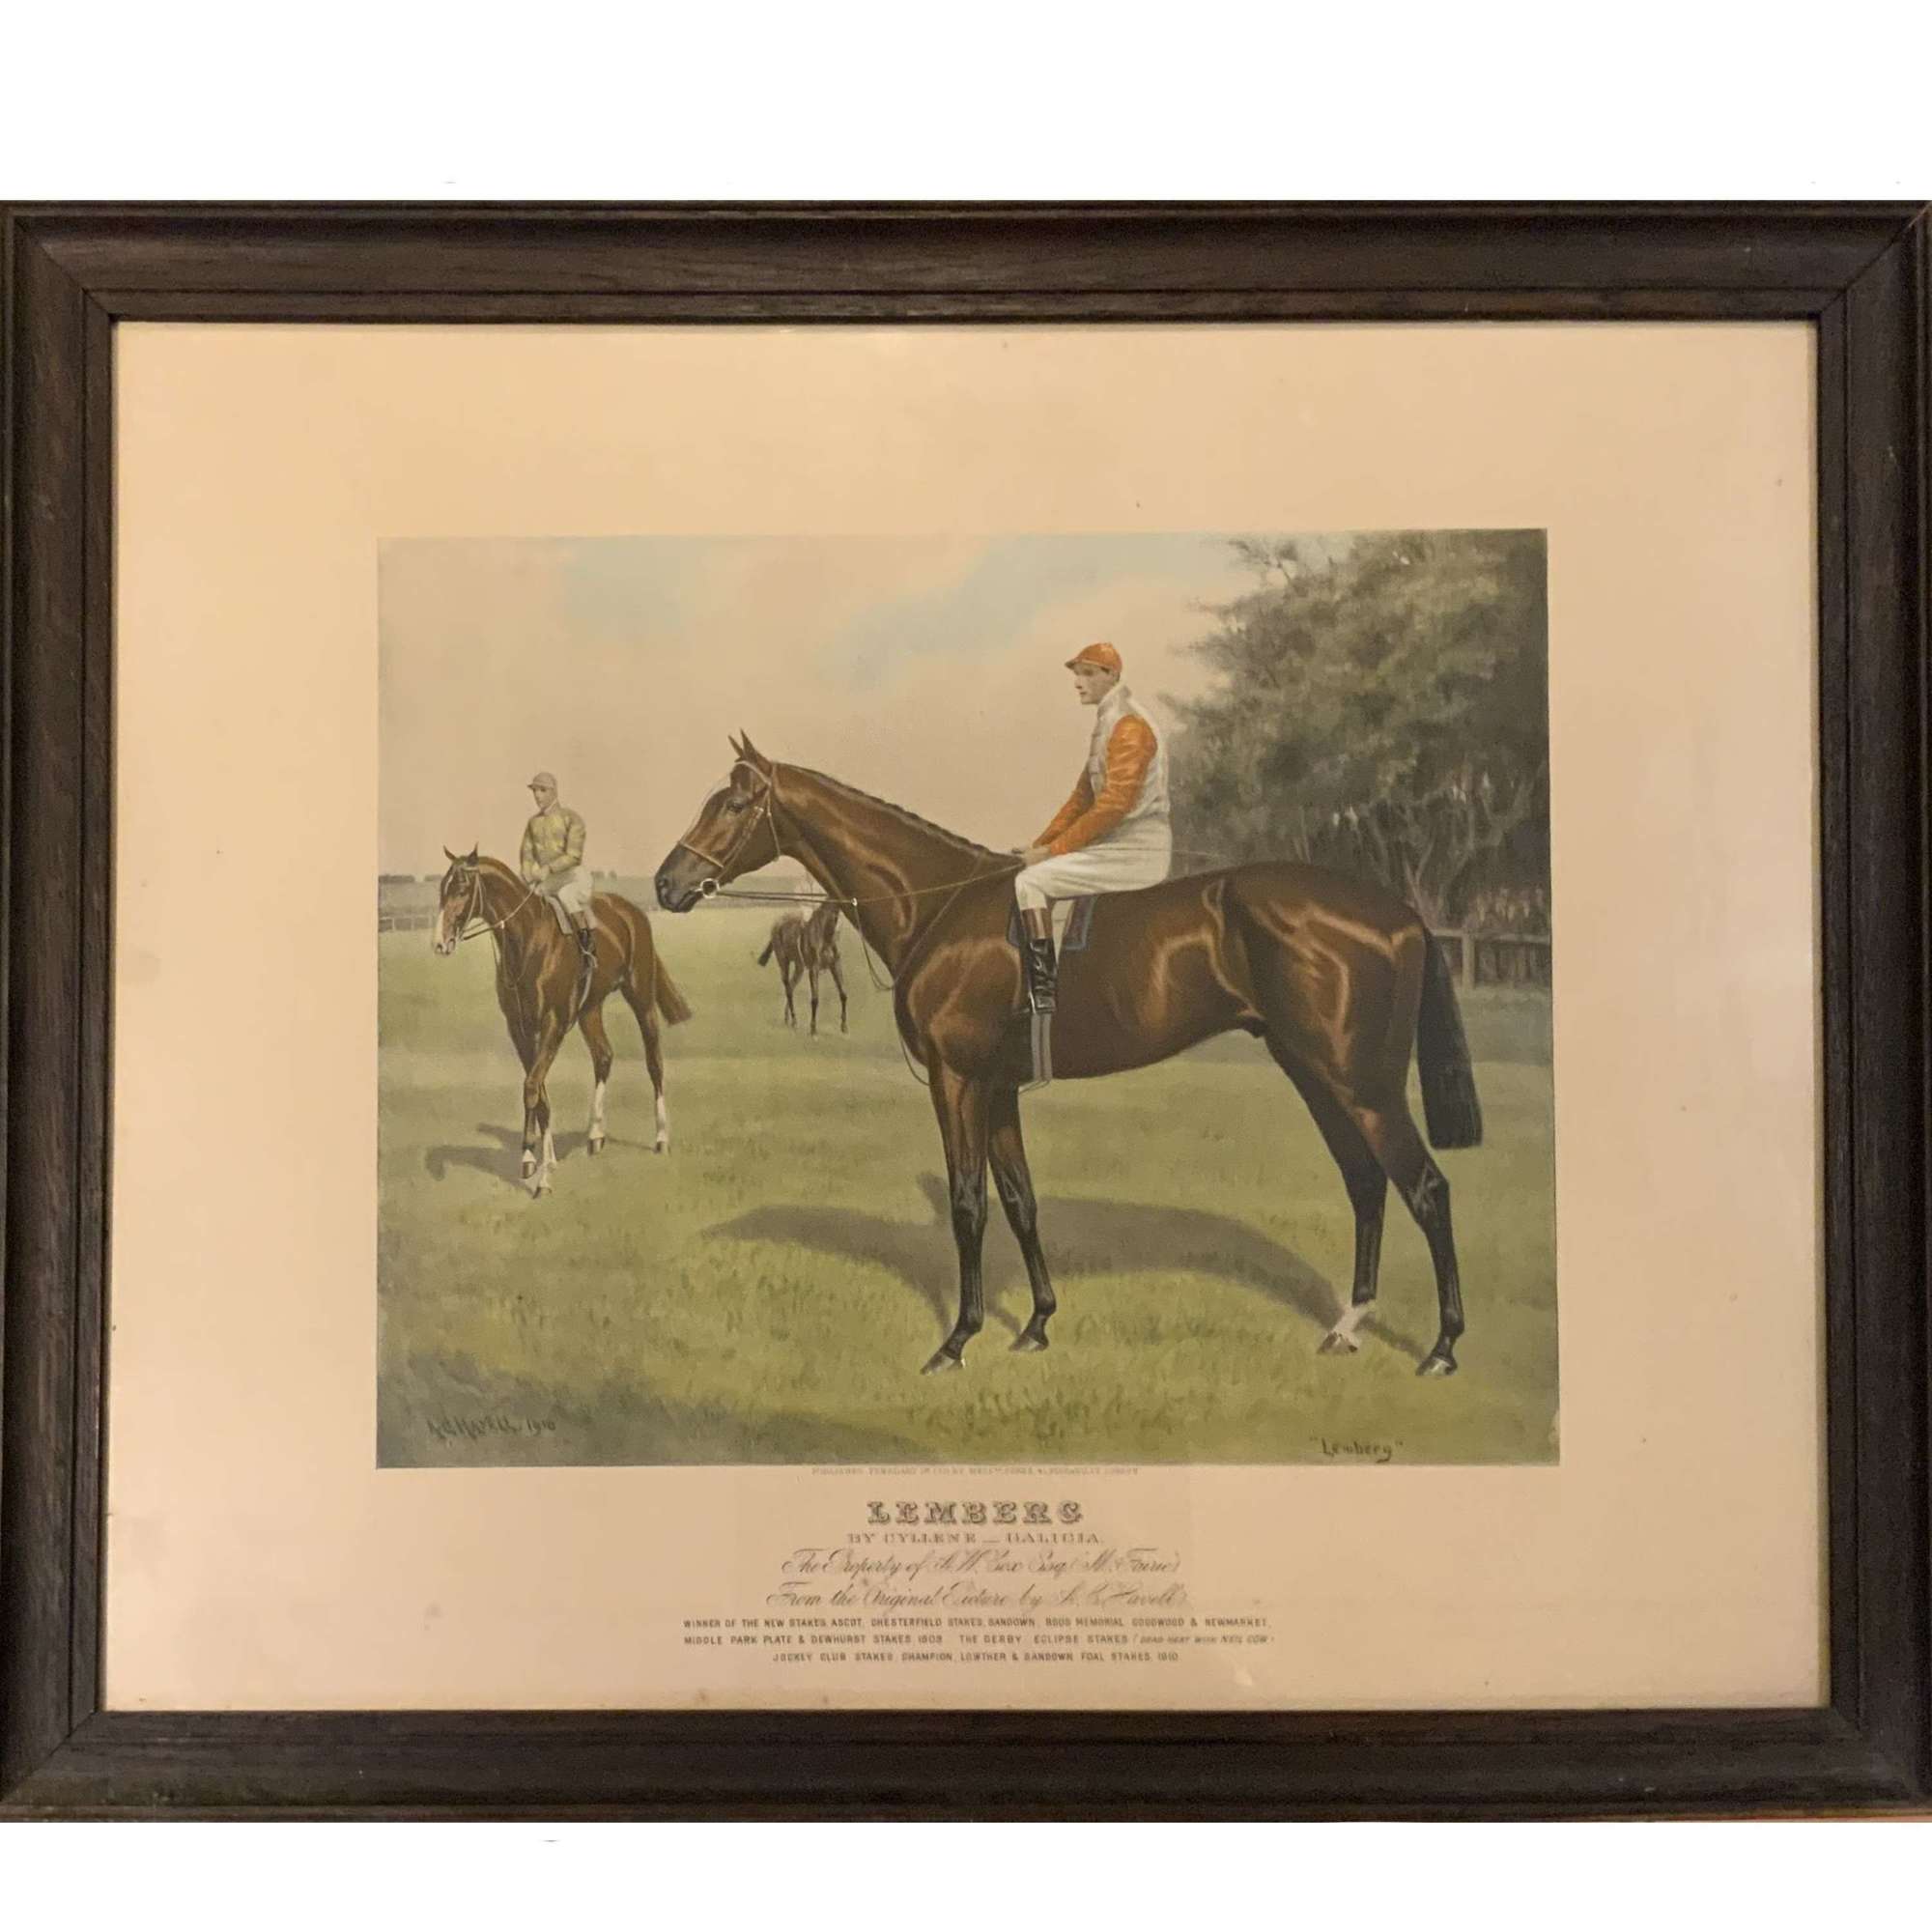 Rare Print of 1910 Derby Winning Horse and Champion Sire “Lemberg”